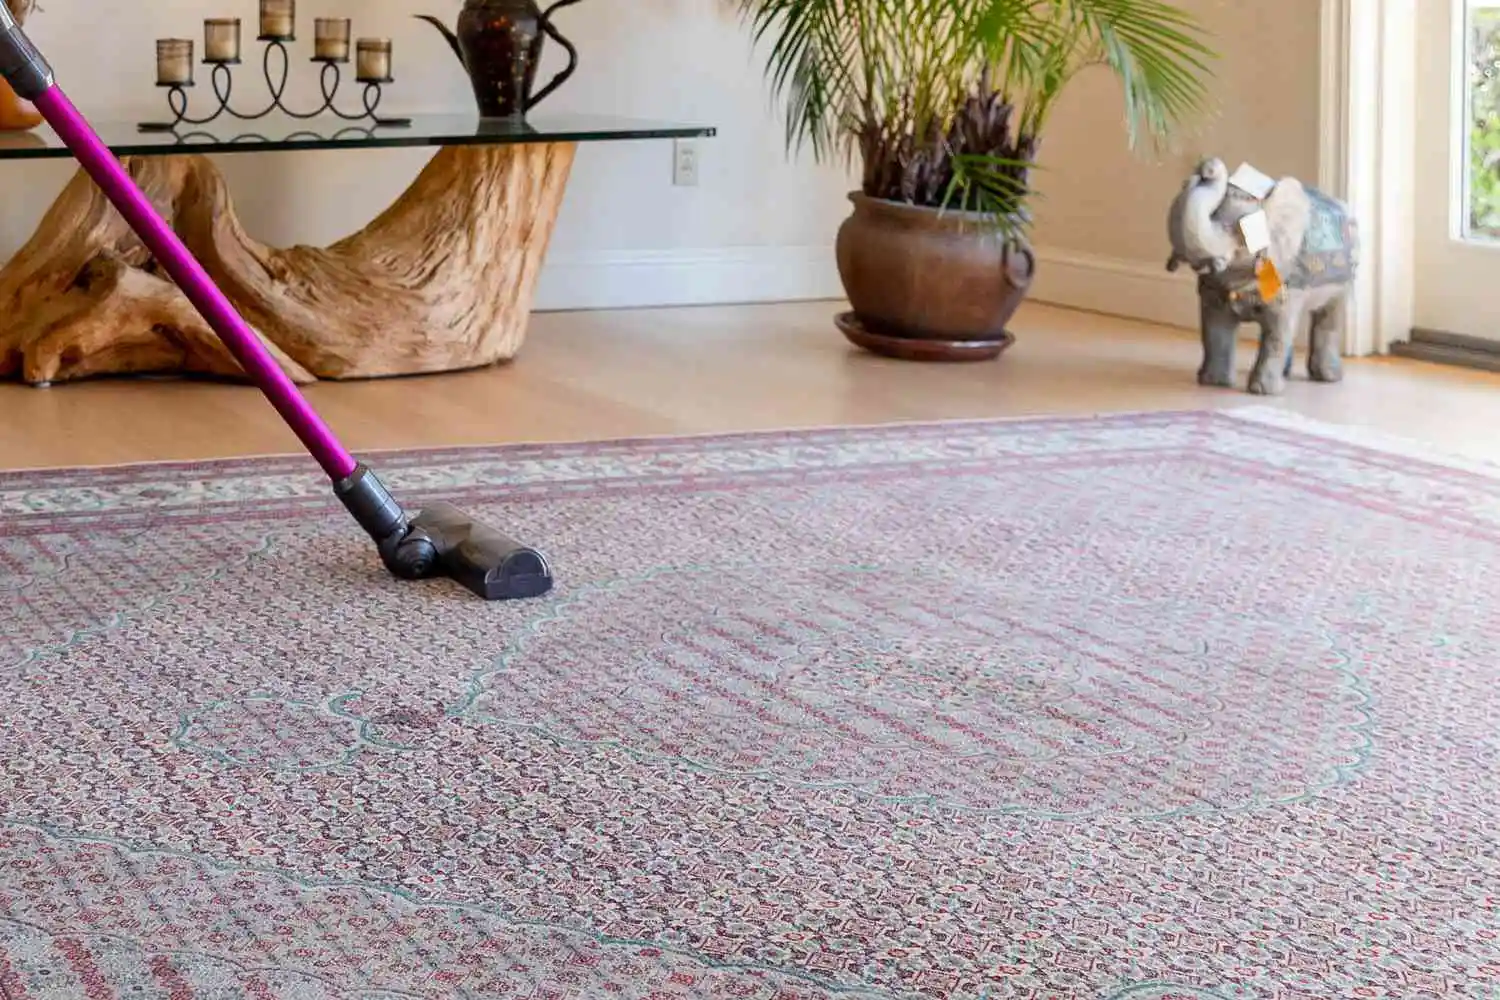 Can You Clean an Area Rug With a Pressure Washer